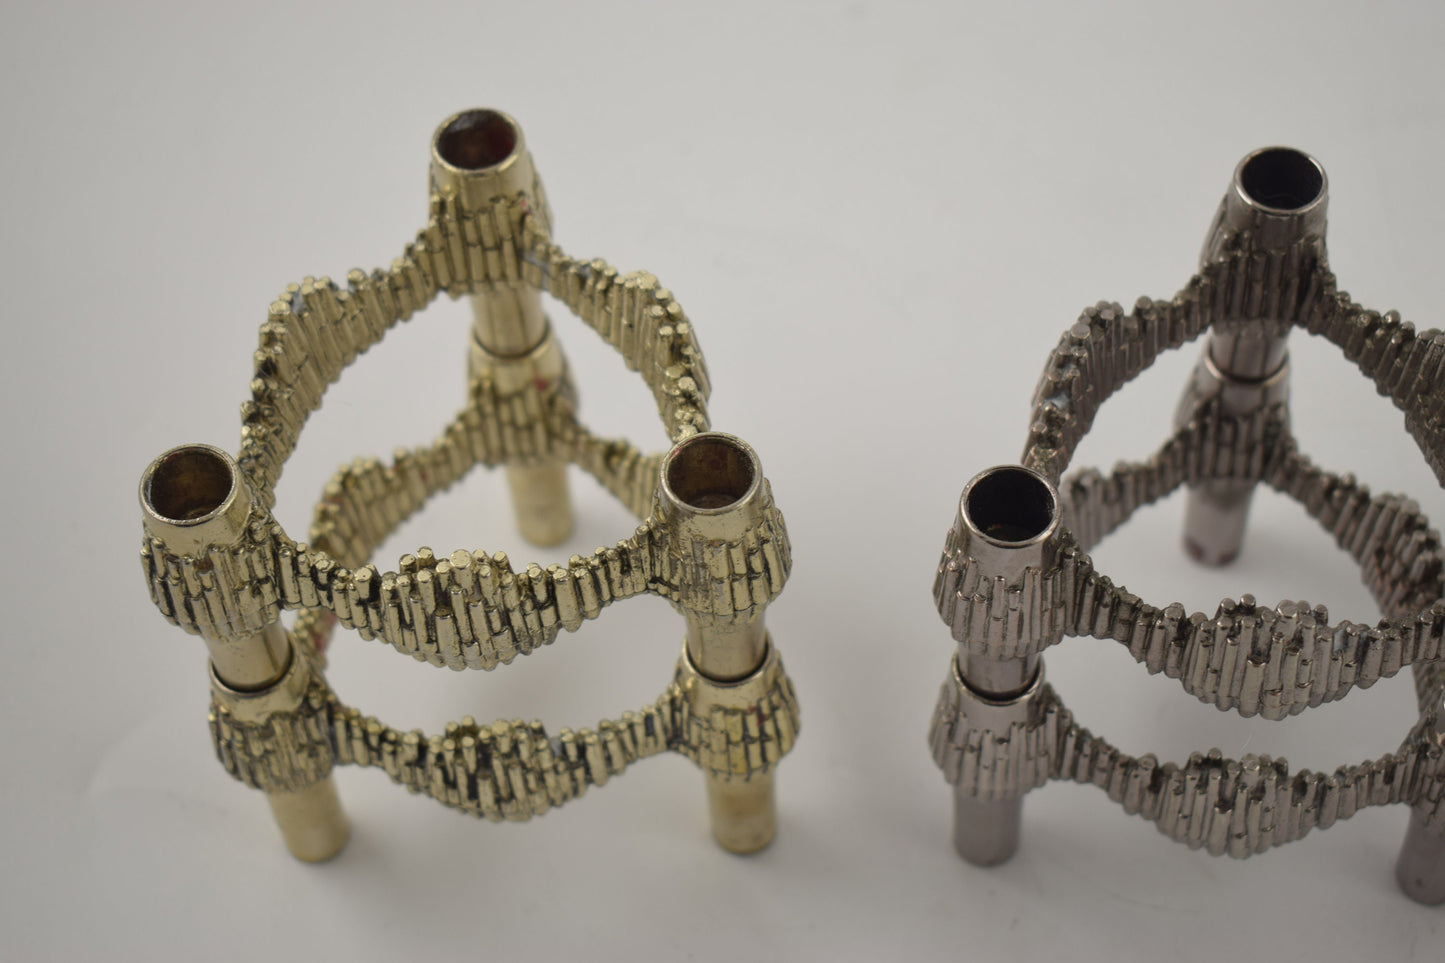 8 candlesticks Quist Nagel, West Germany, typical candle holder from the 1960s and 1970s